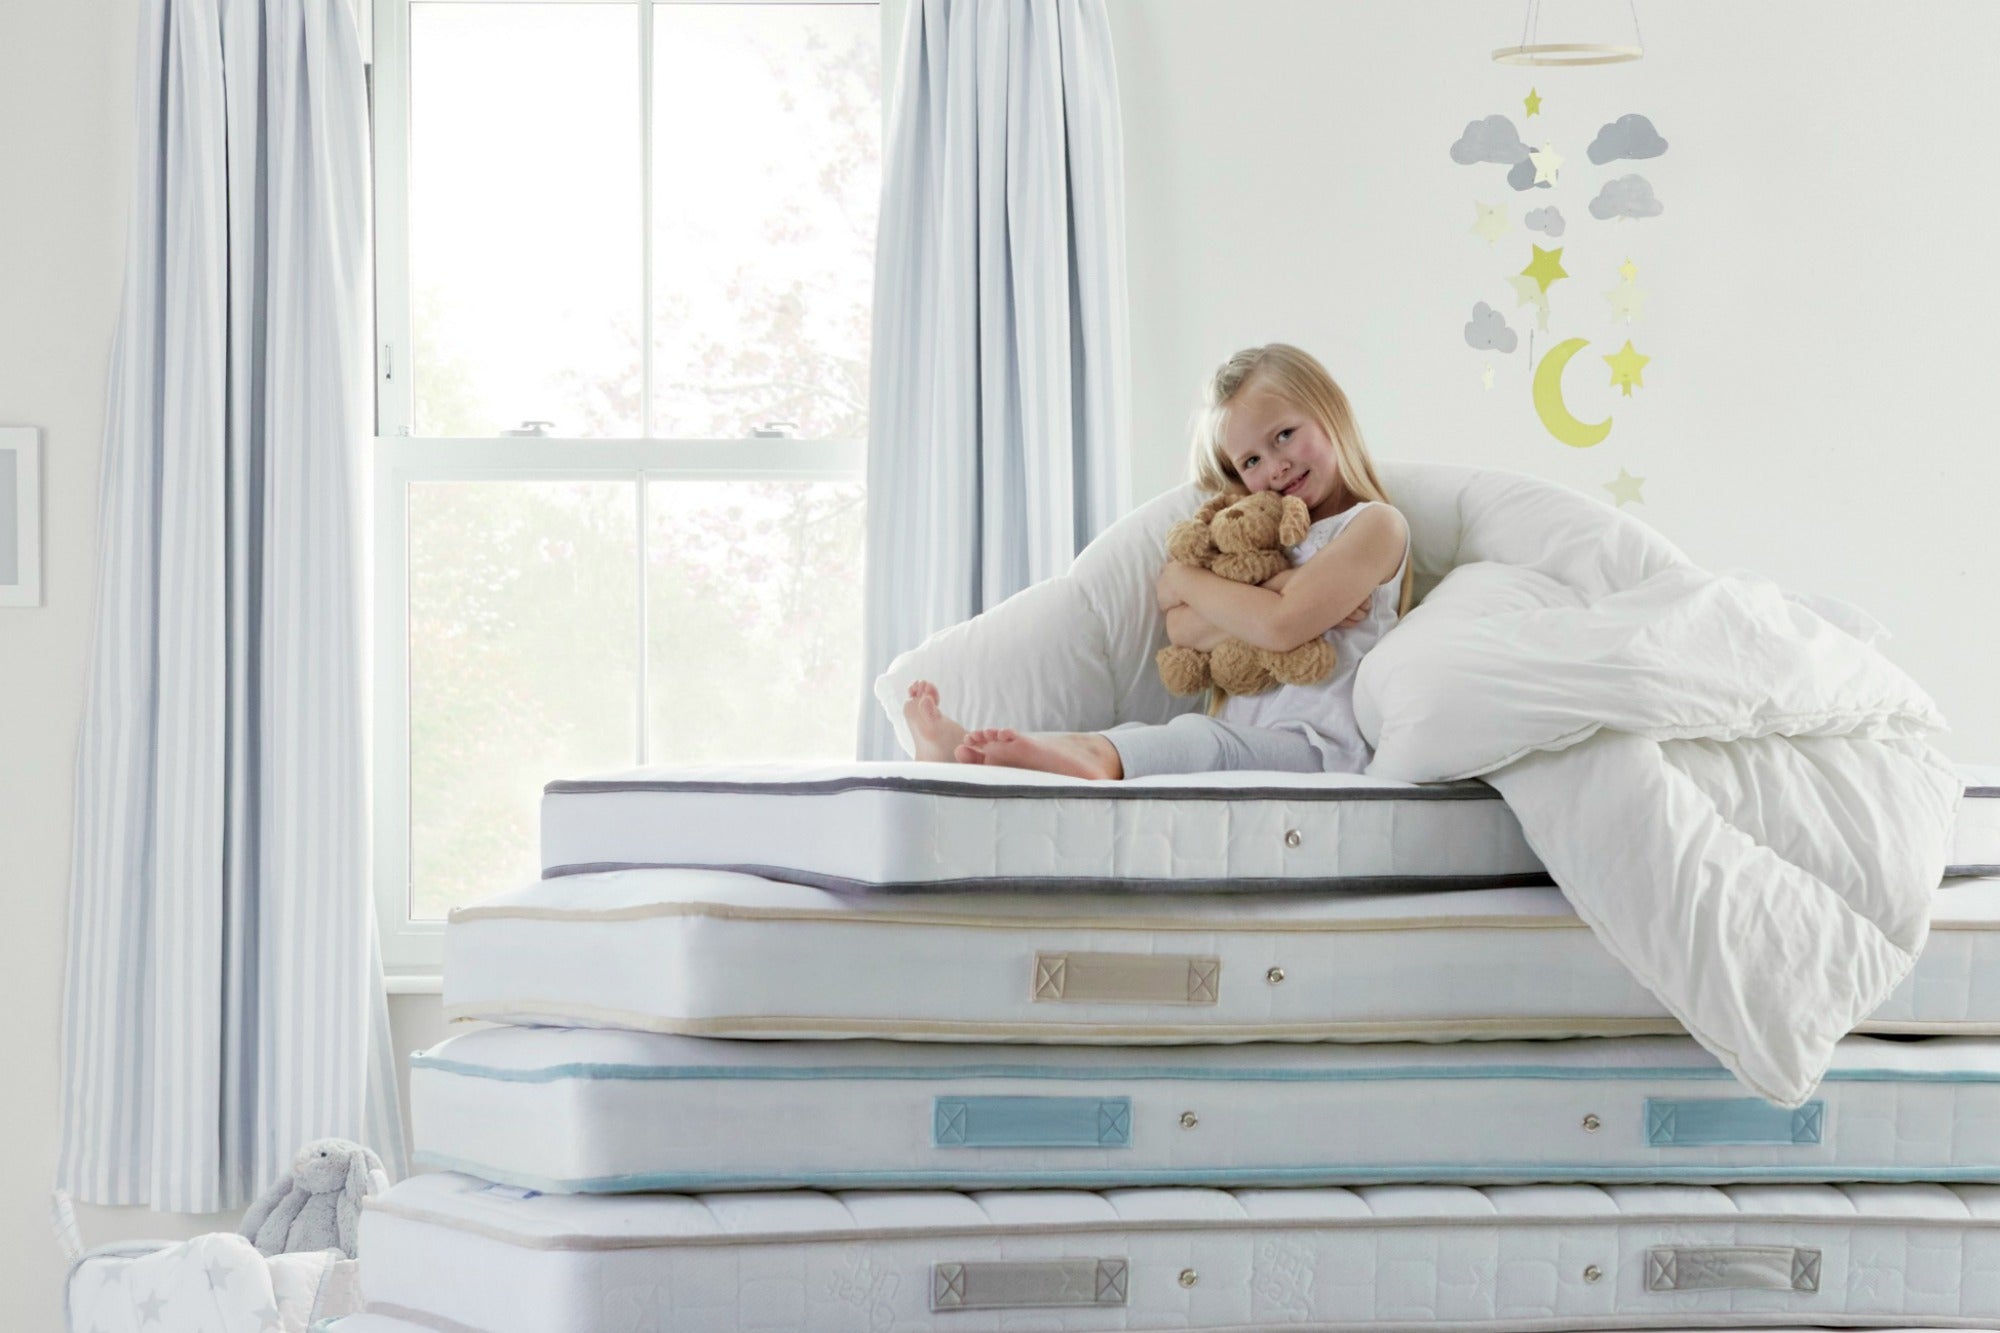 Behind The Scenes: Your Mattress Questions Answered